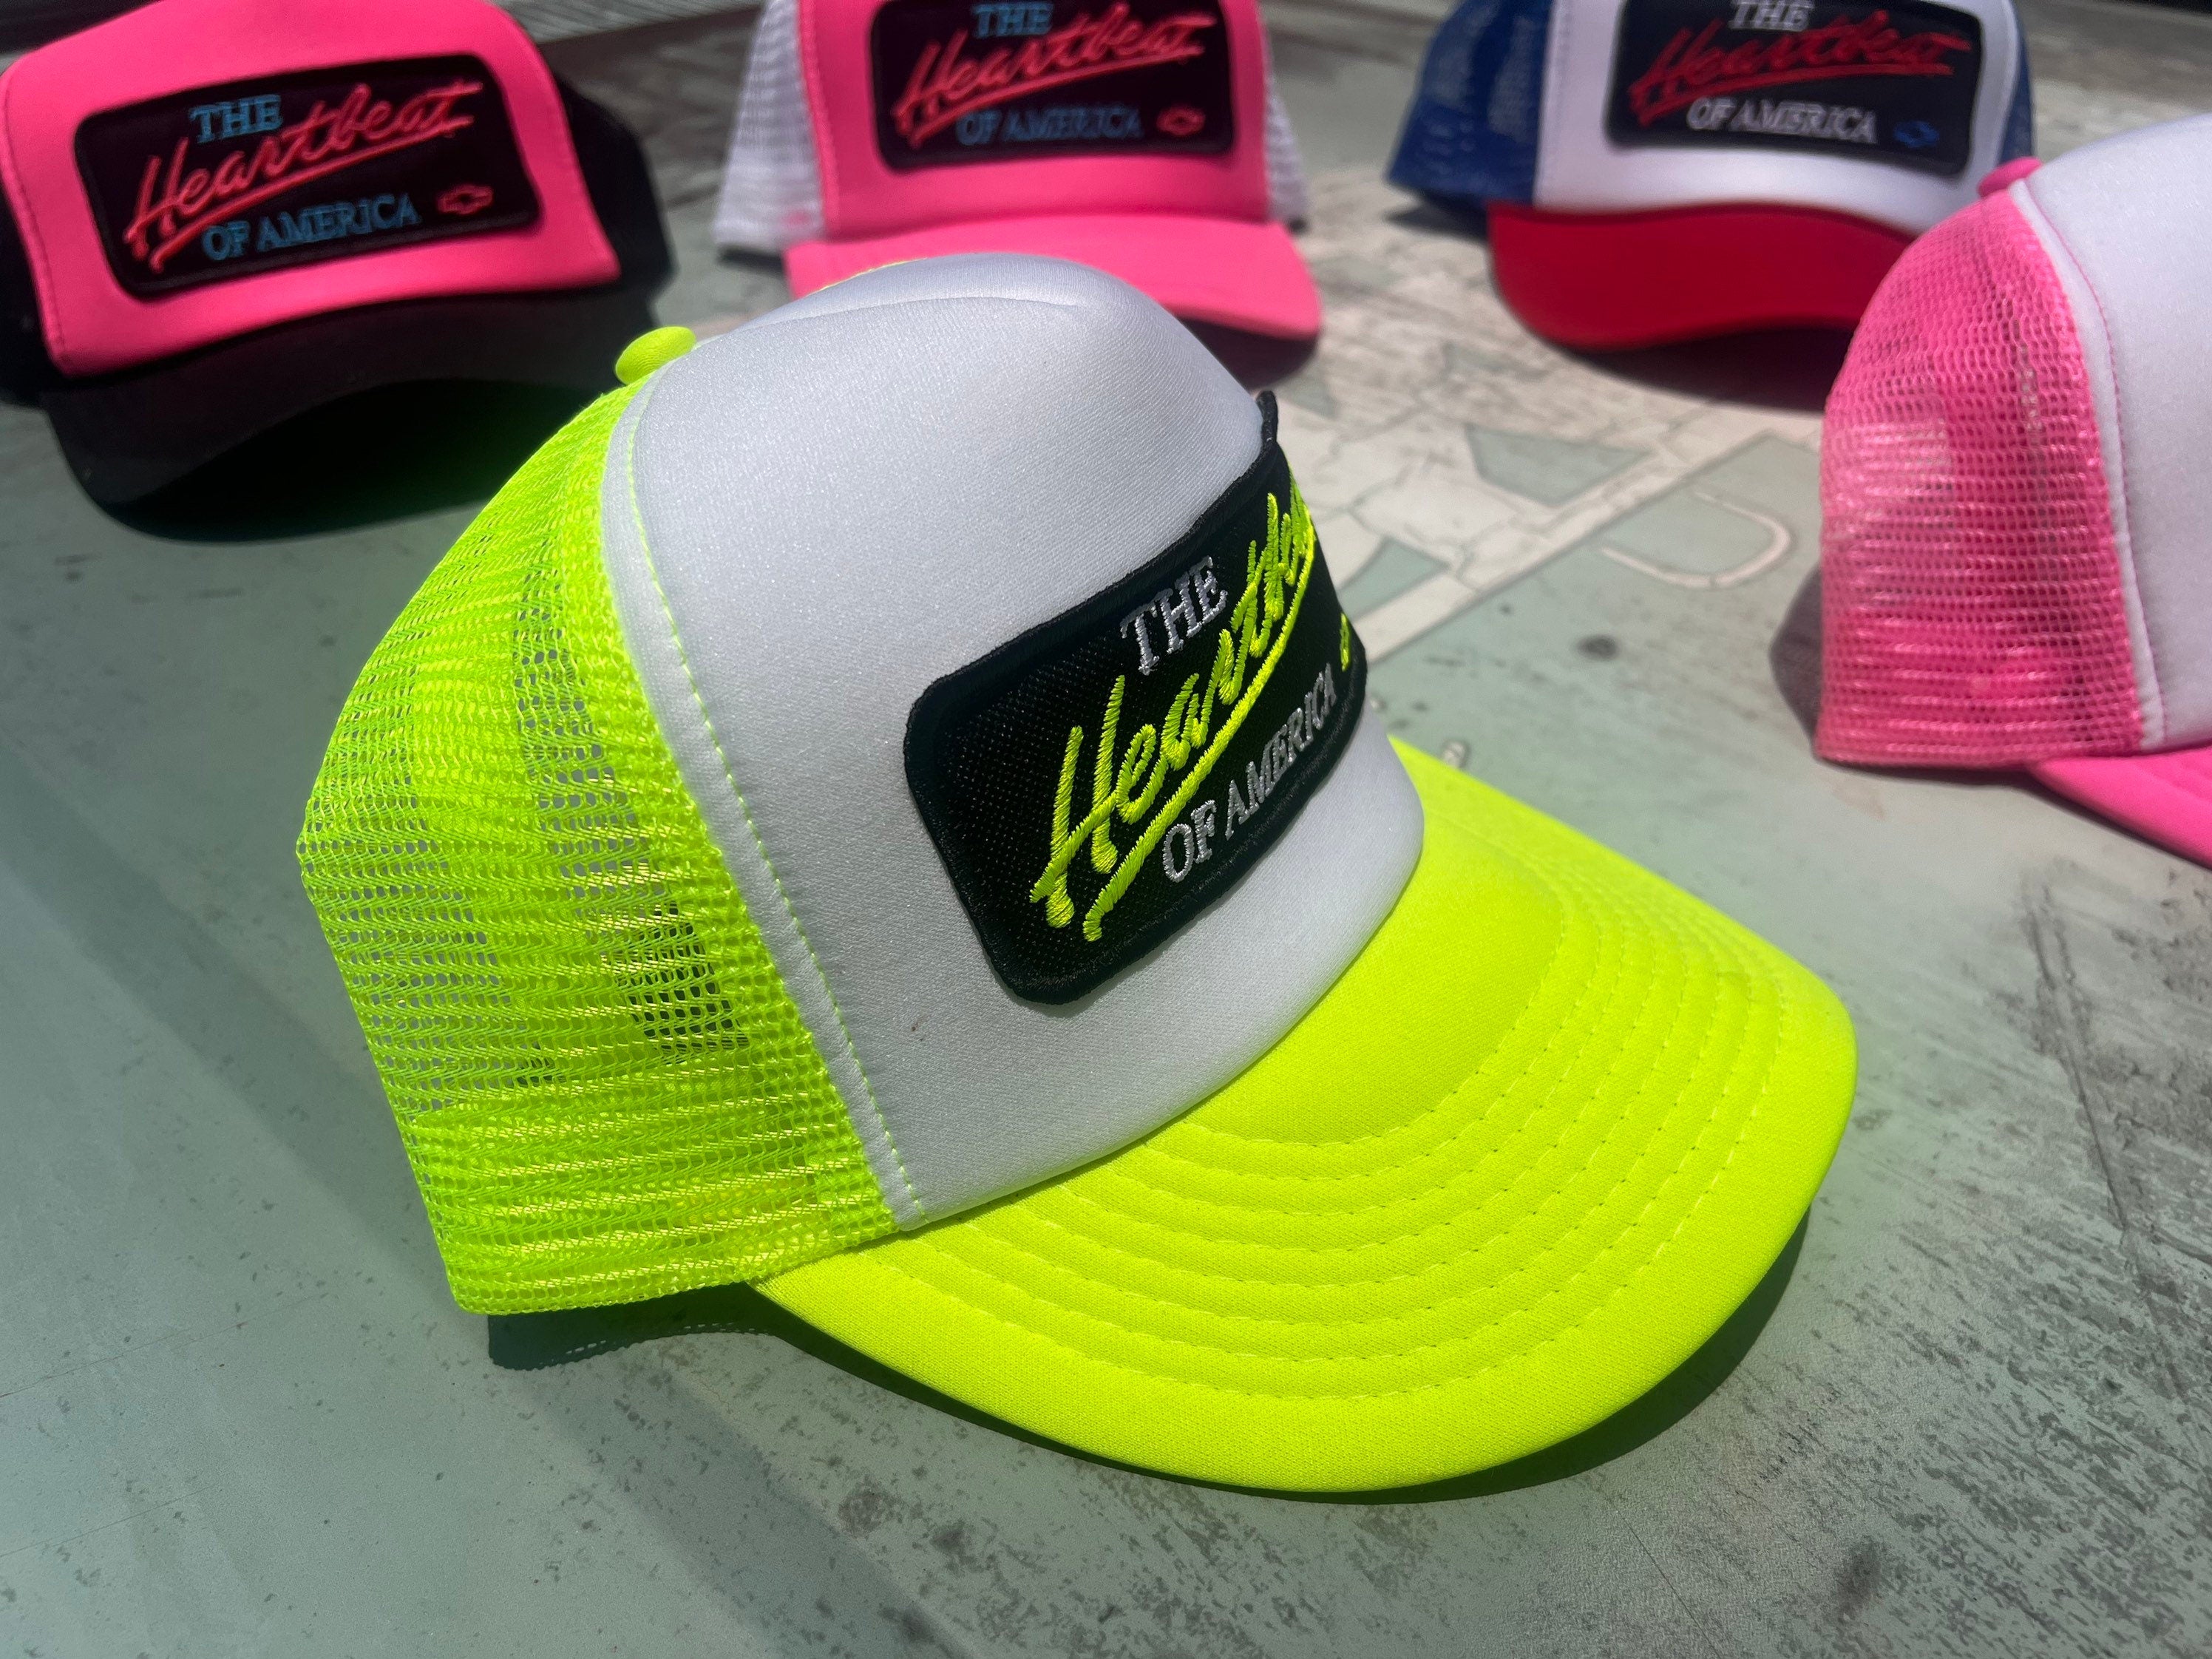 Vintage Chevy Heartbeat of America Neon Snapback Trucker Hat - Foam Mesh  Cap with Vibrant Colors - Perfect Gift for Chevy Fans